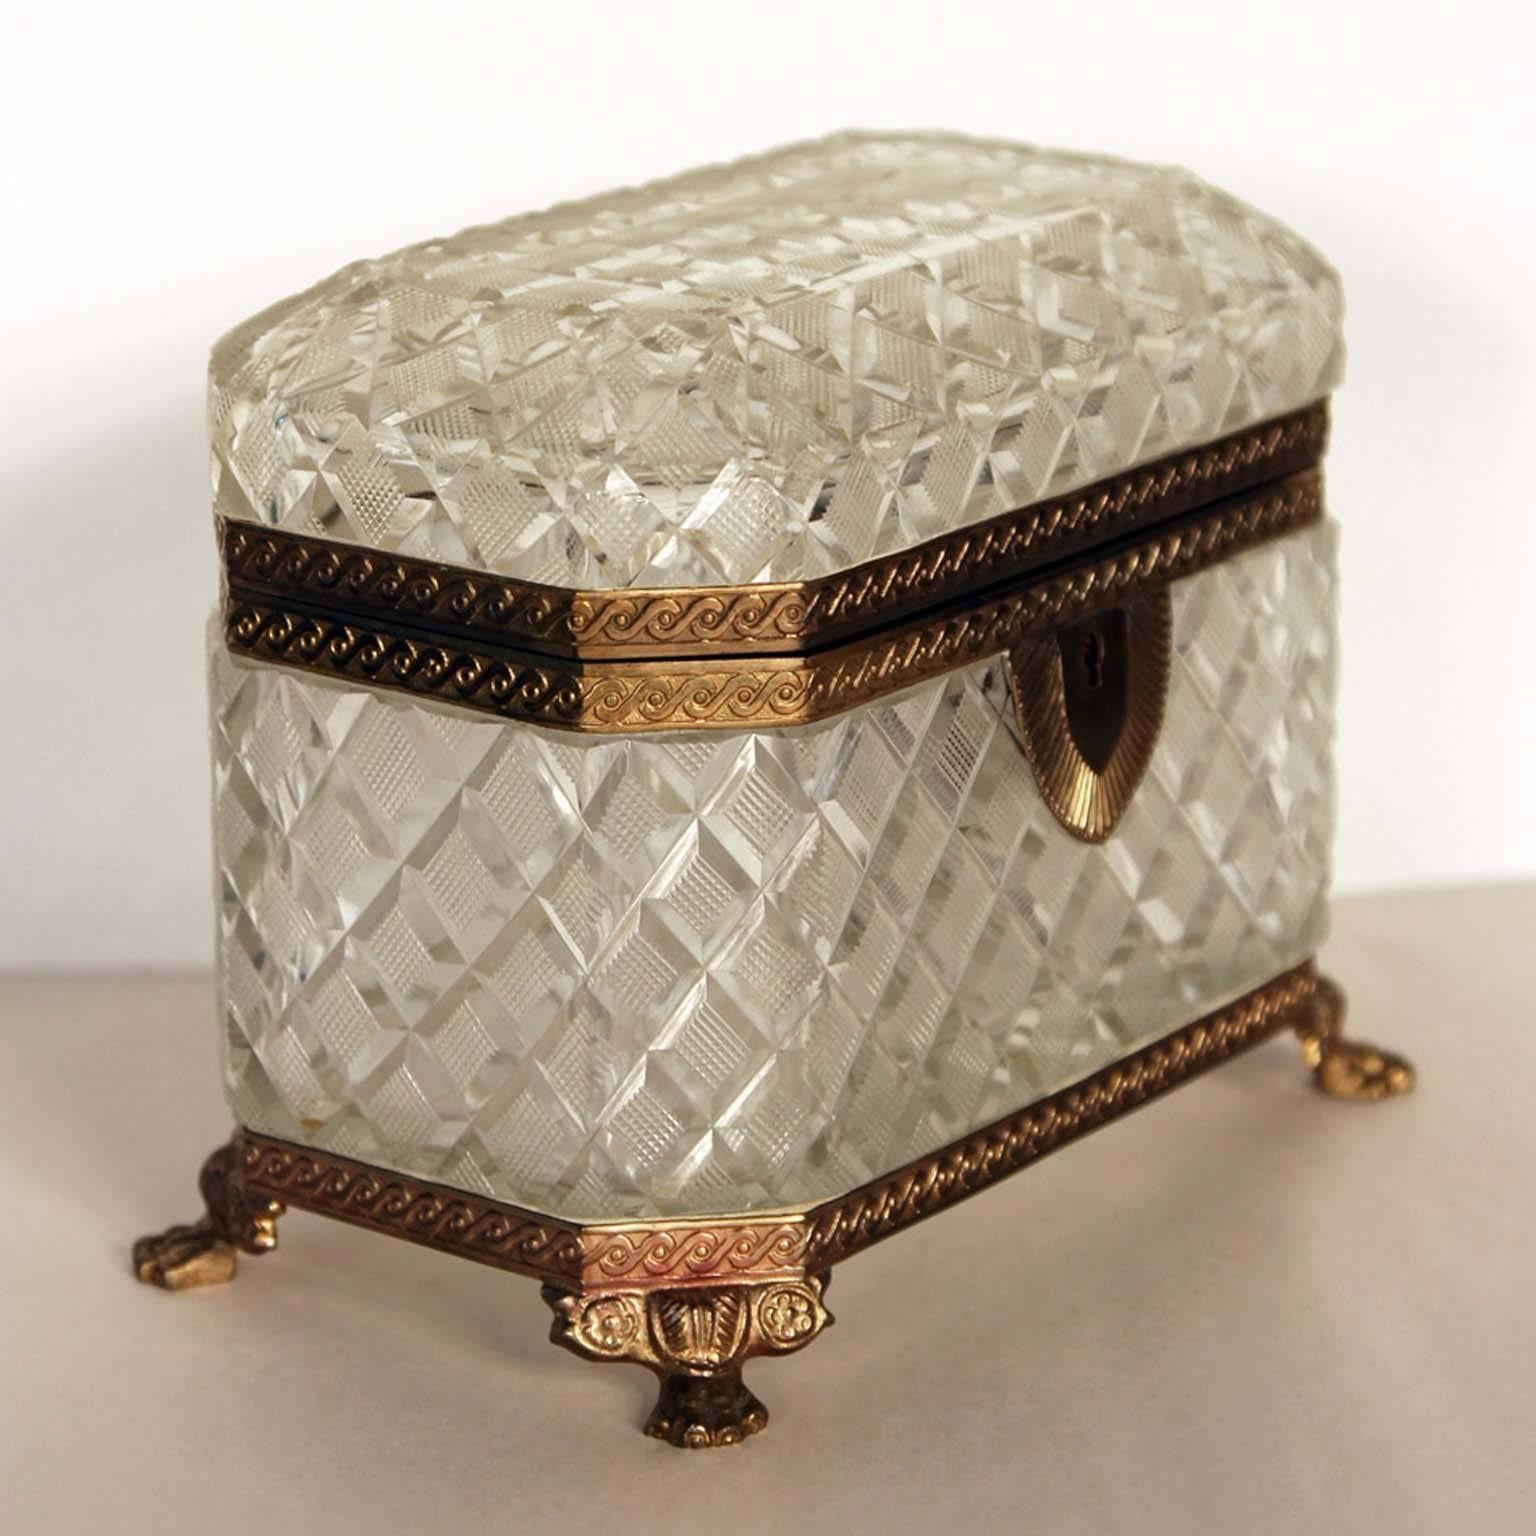 A large antique baccarat jewel box, circa 1900, French baccarat. Gilt bronze and diamond cut crystal jewel box casket having a large size. 5.5 Inches tall and 7 inches wide. Detailed animal paw feet and engine turned design work on the mounts.